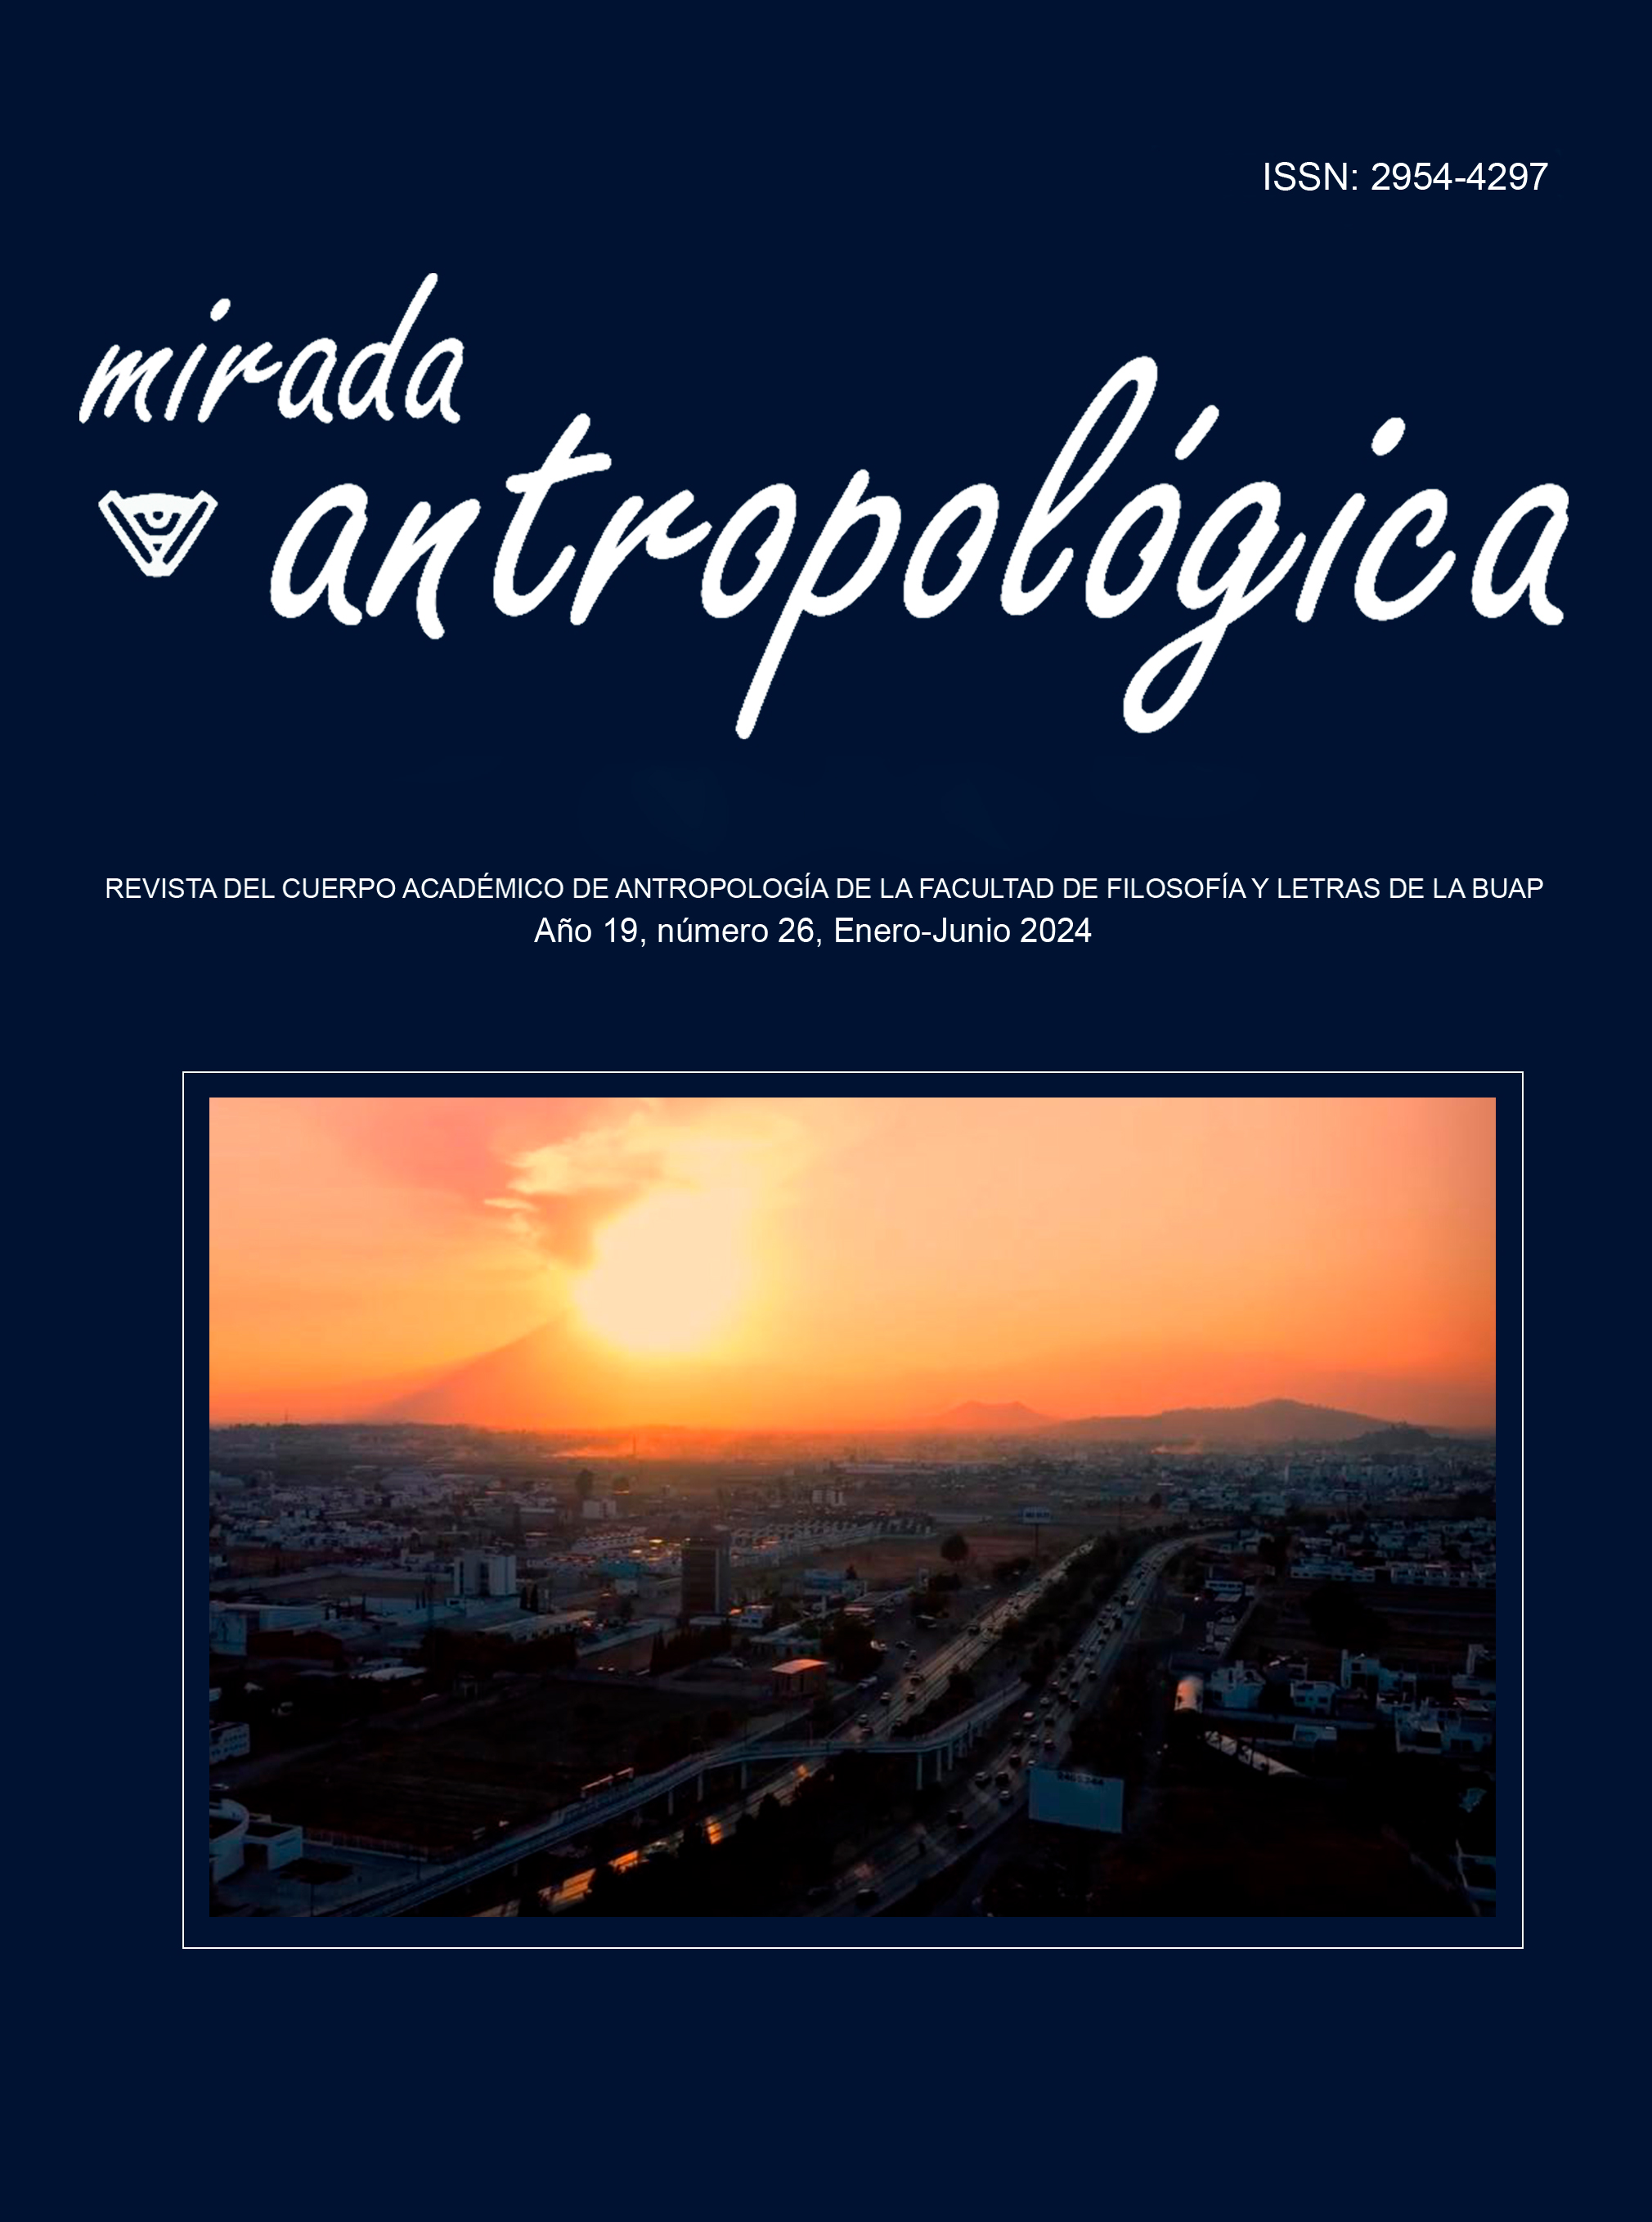 Cover page of Issue 26 of Mirada Antropológica Journal